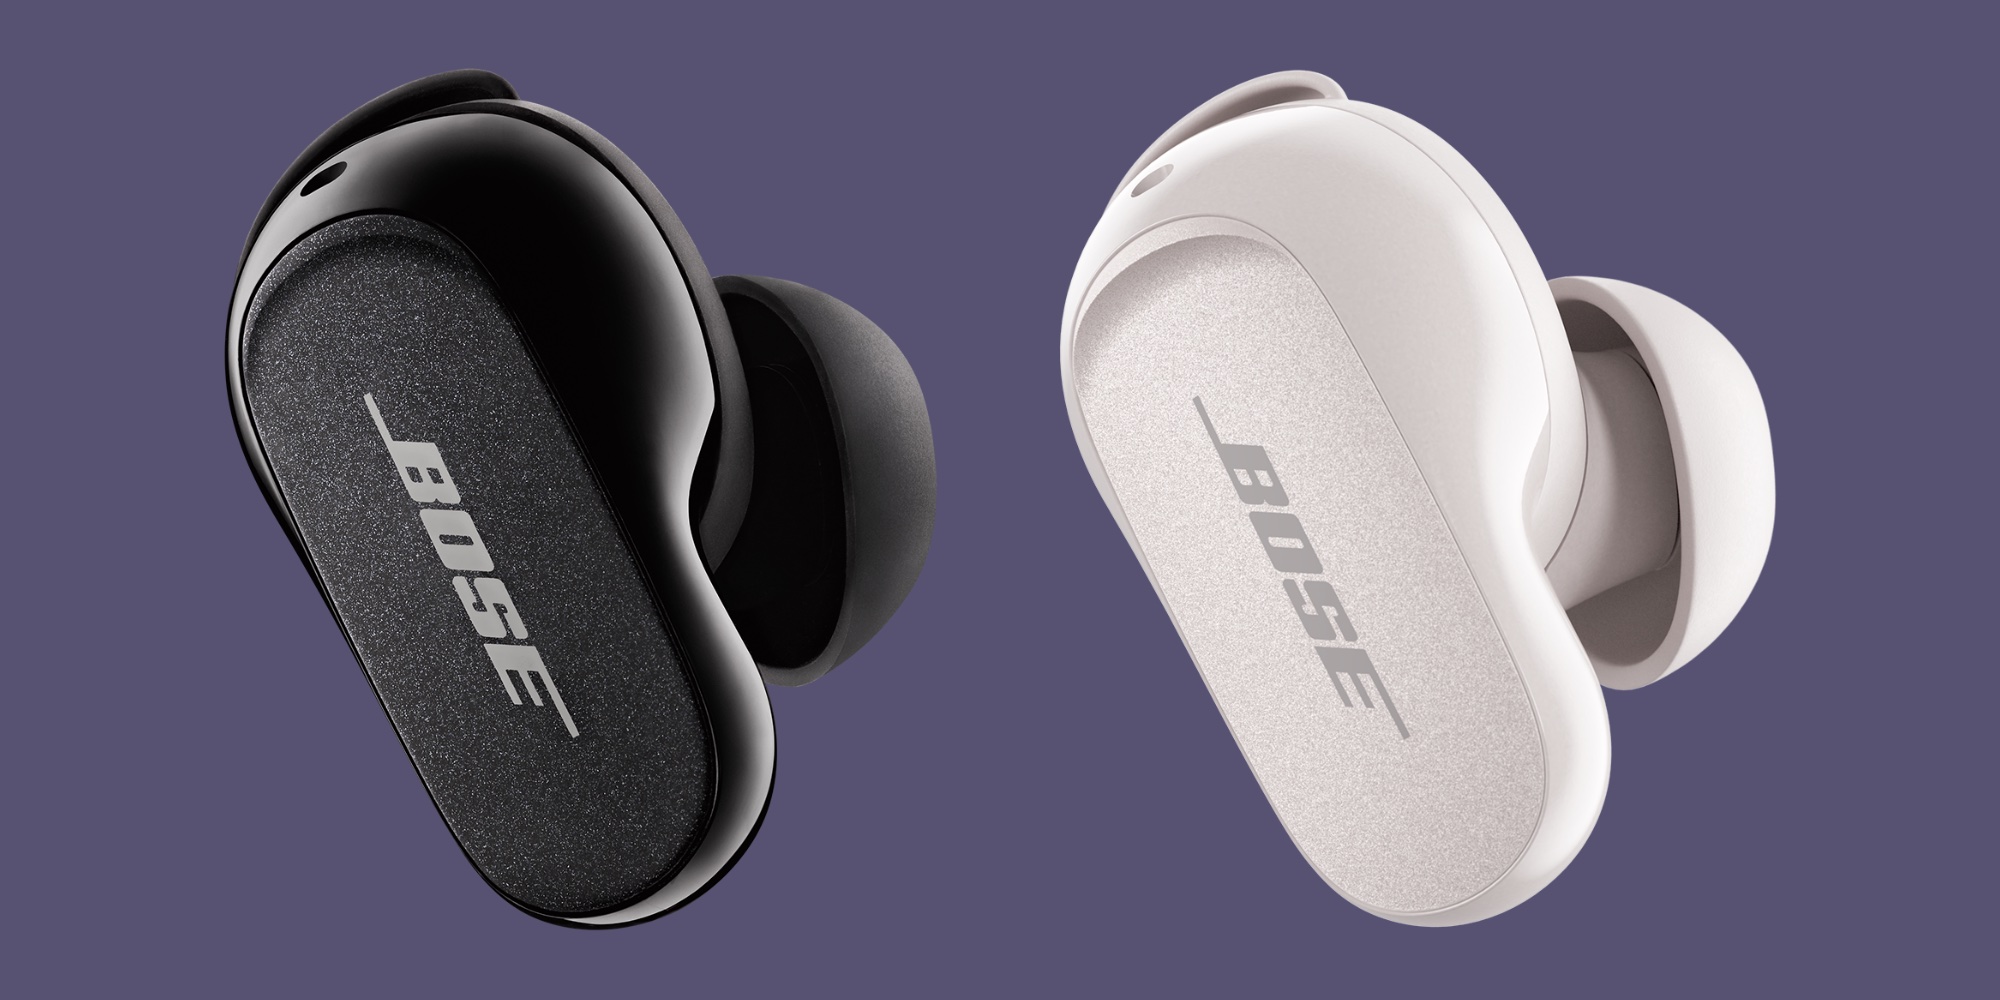 Bose QuietComfort II earbuds arrive to take on Apple's latest